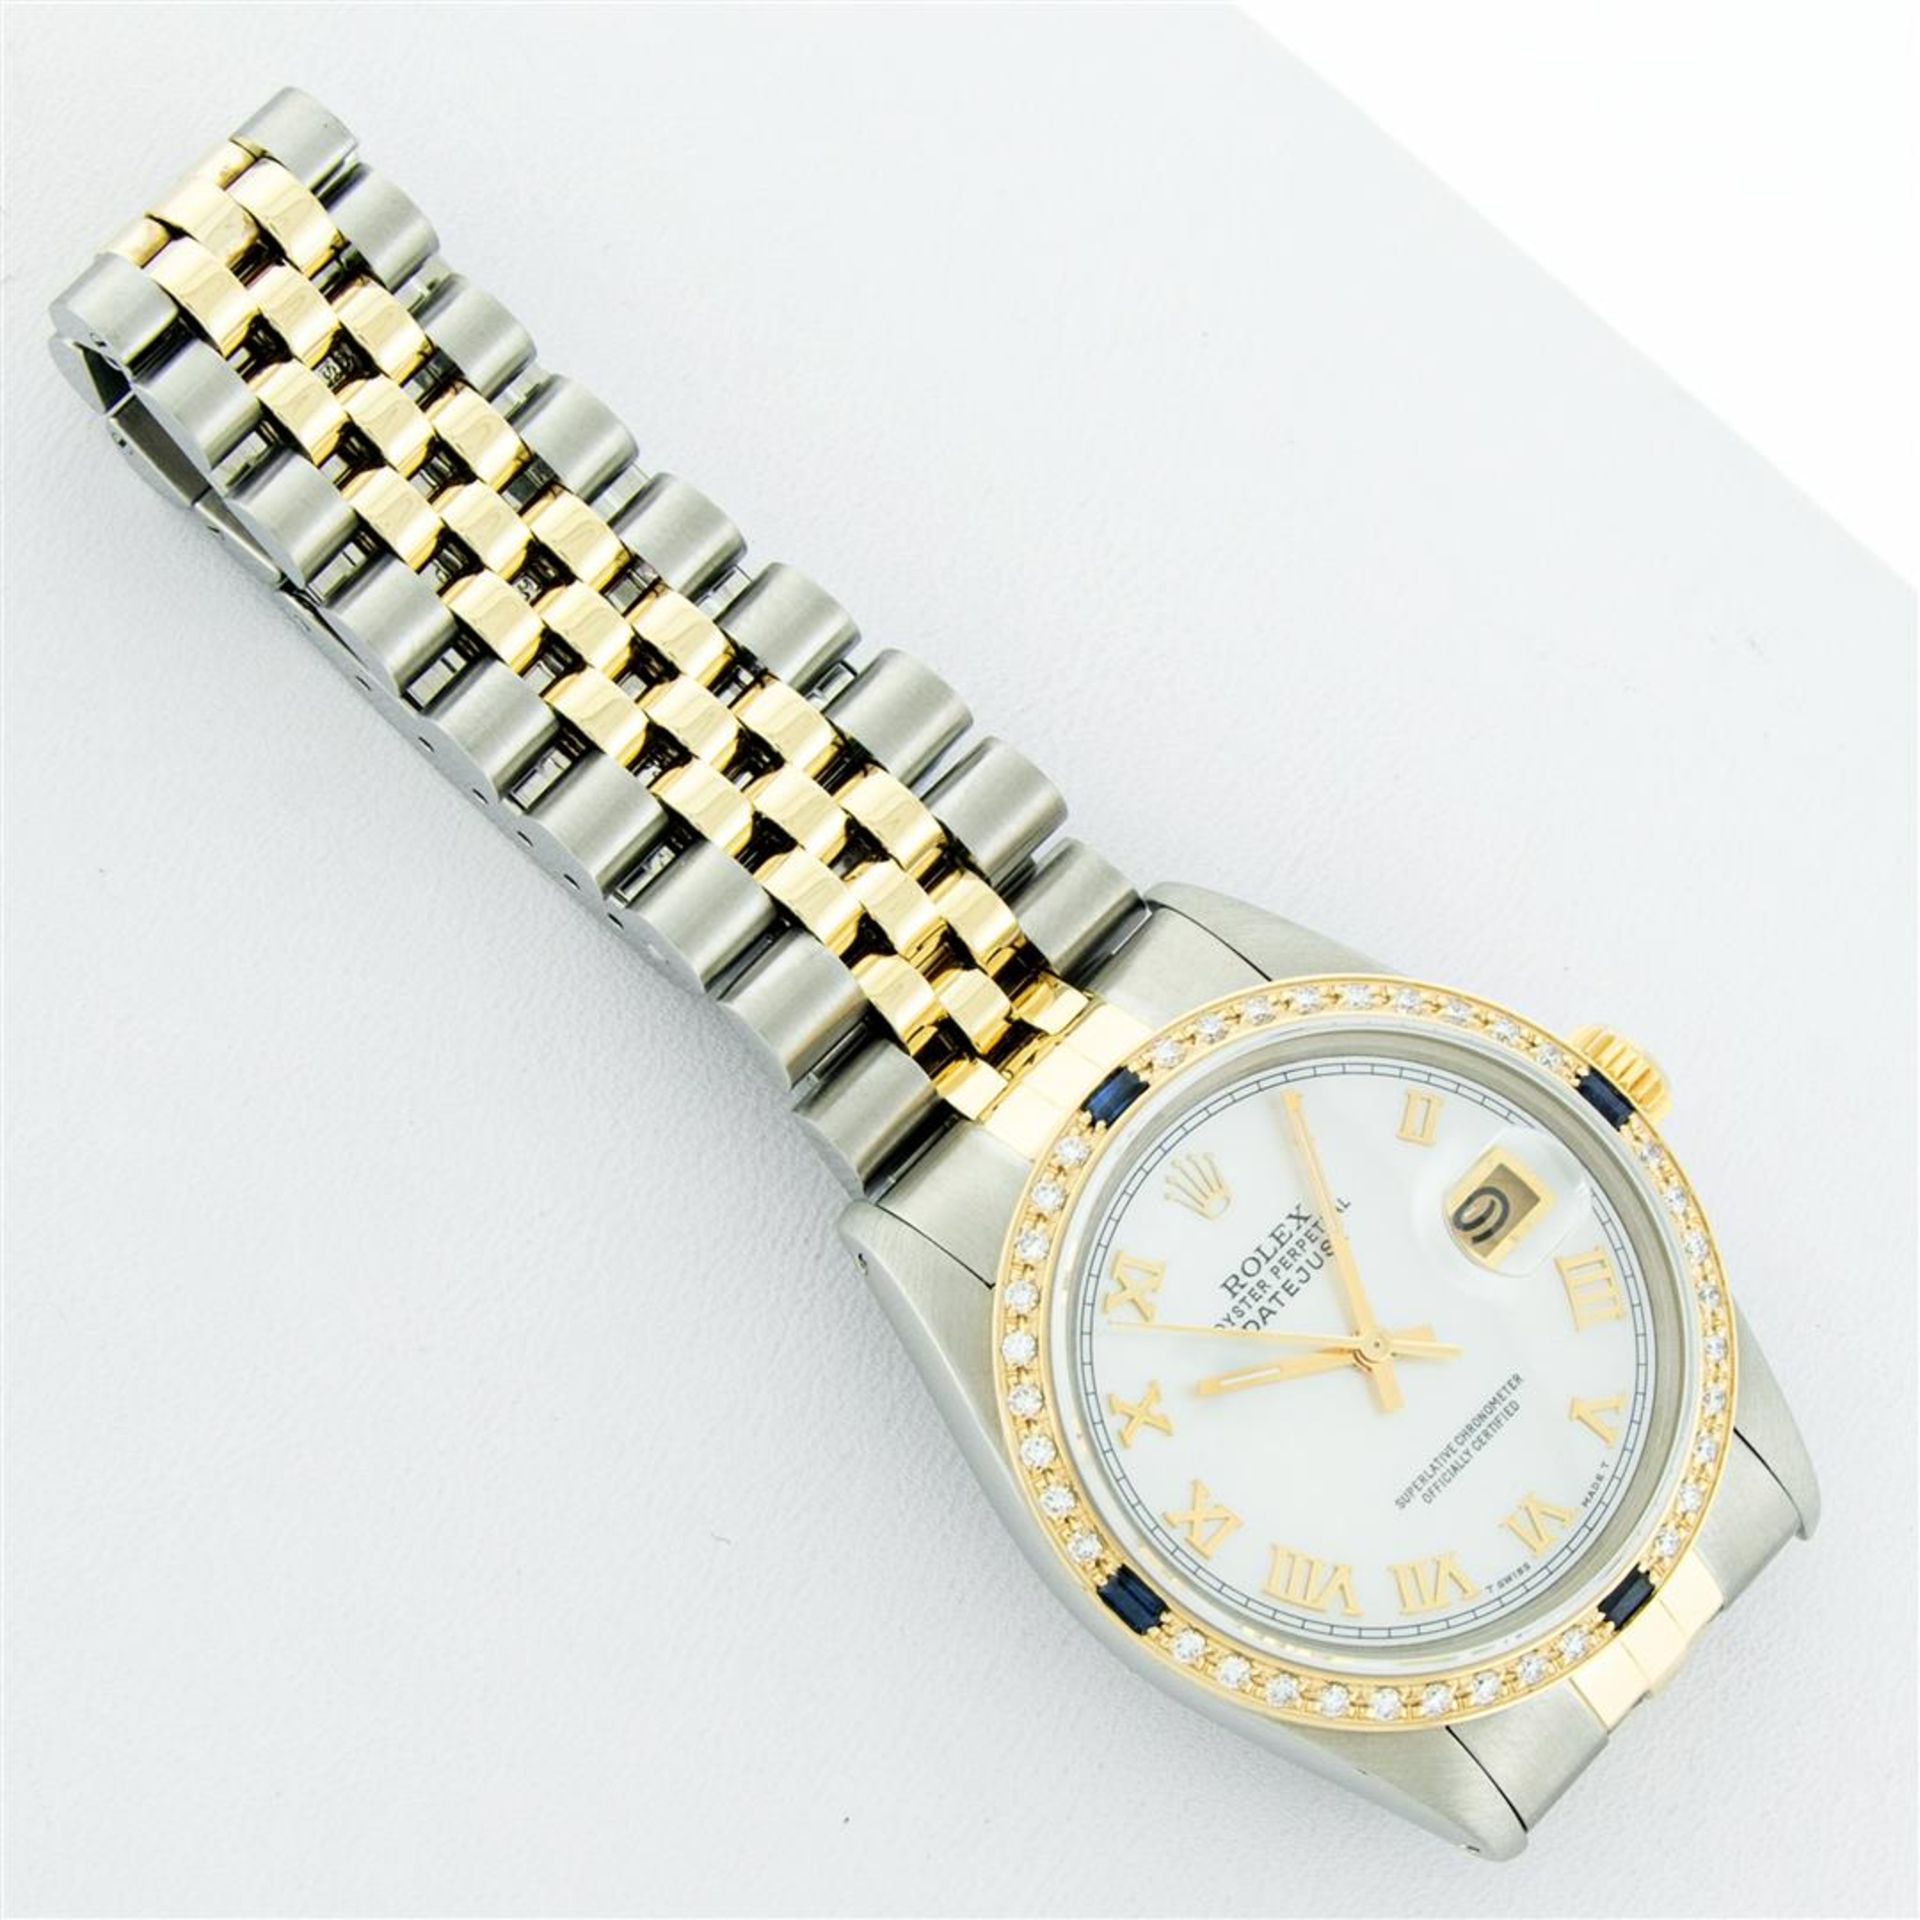 Rolex Mens 2 Tone Mother Of Pearl Diamond & Sapphire 36MM Datejust Wristwatch - Image 6 of 9